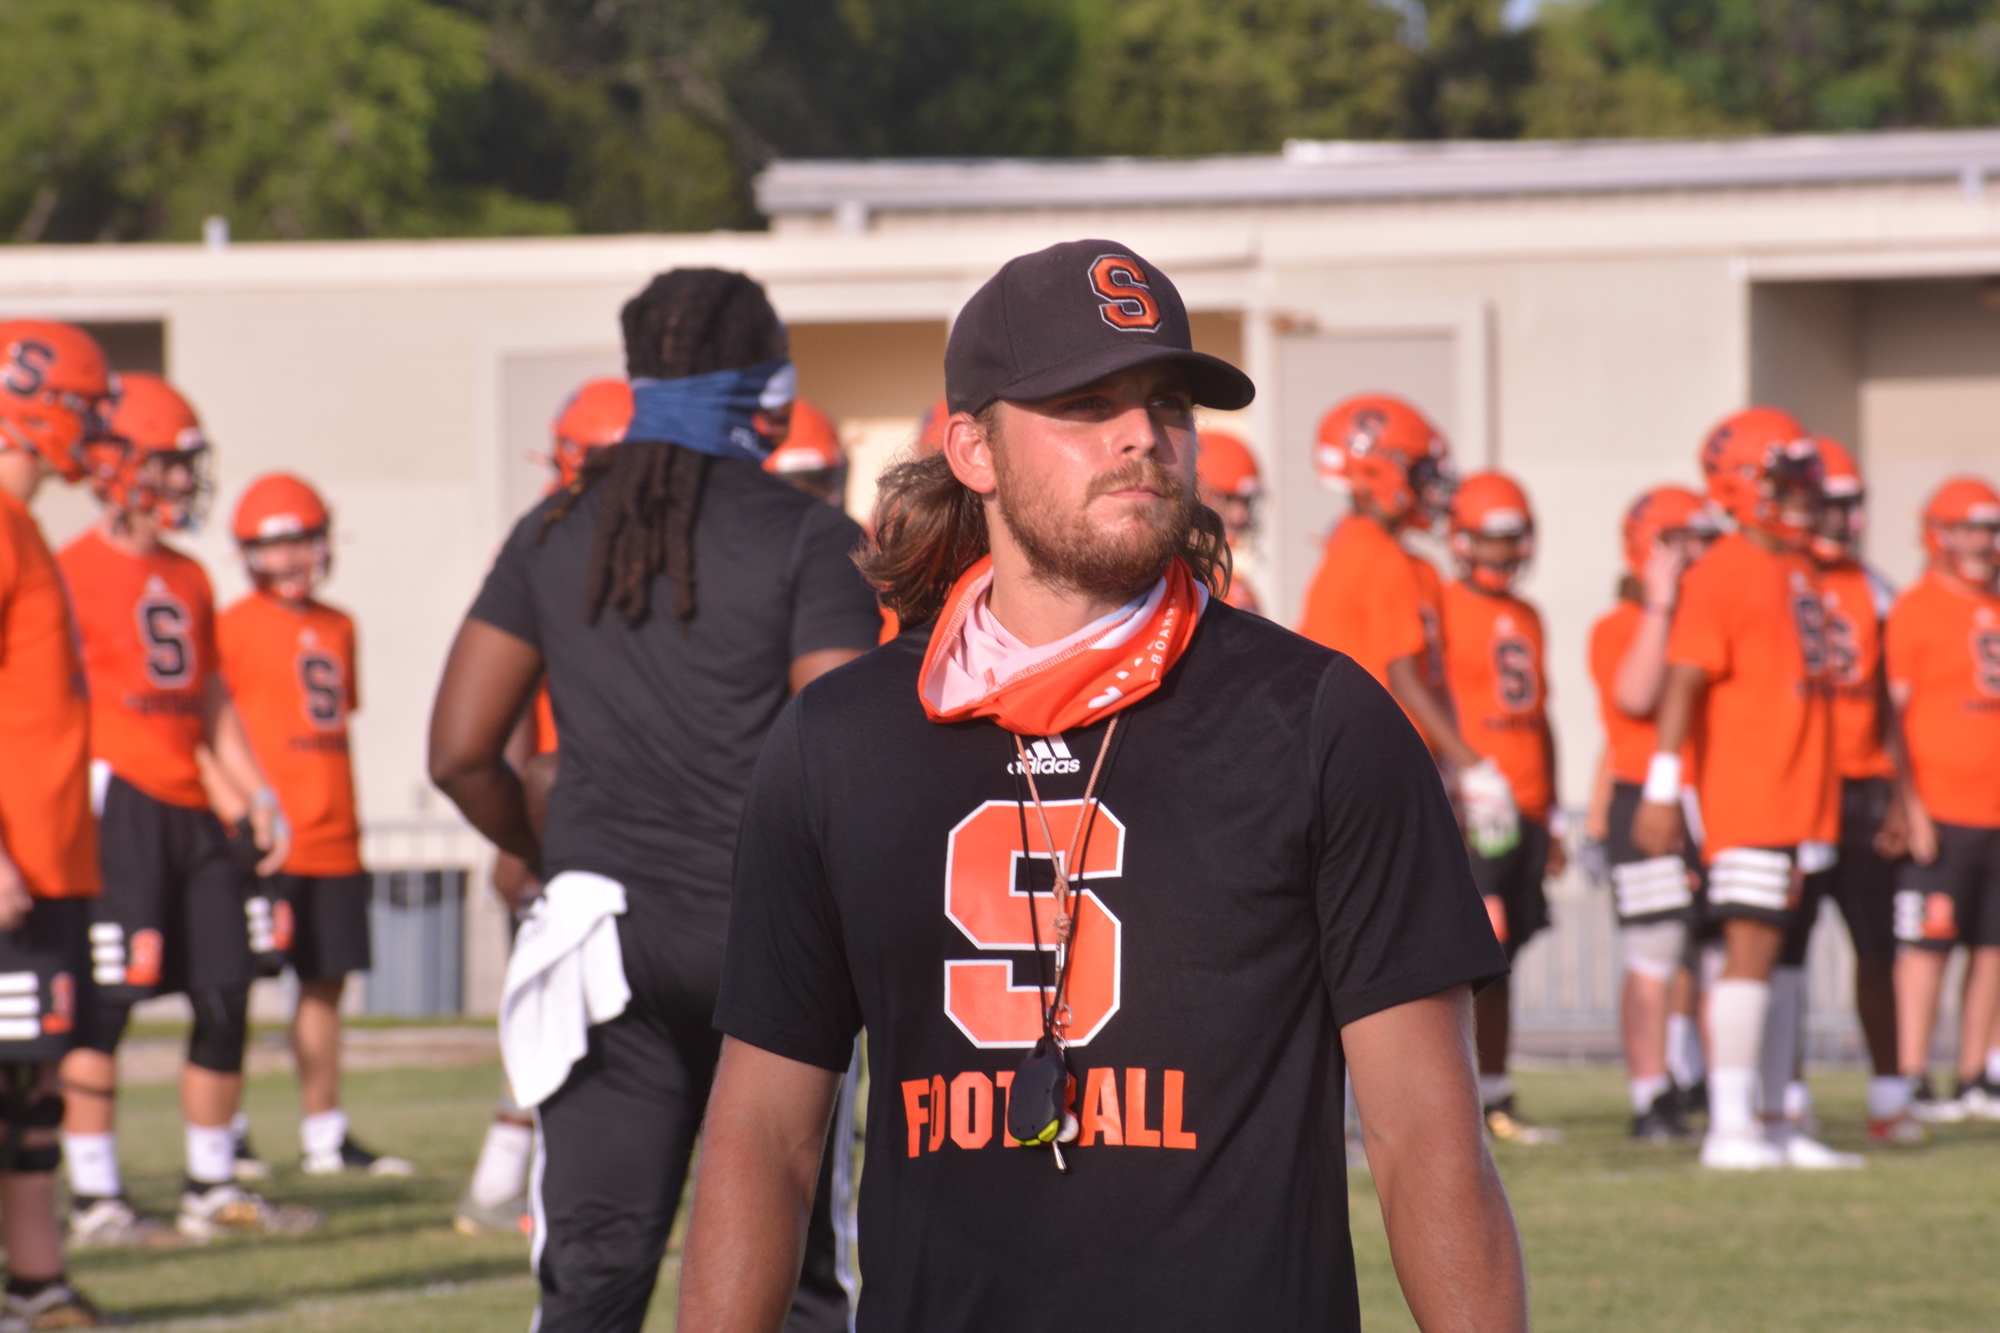 Sarasota High head Coach Brody Wiseman continued his reworking of the program's coaching staff by hiring former Booker head Coach Johnnie Jones to coach the Sailors secondary.